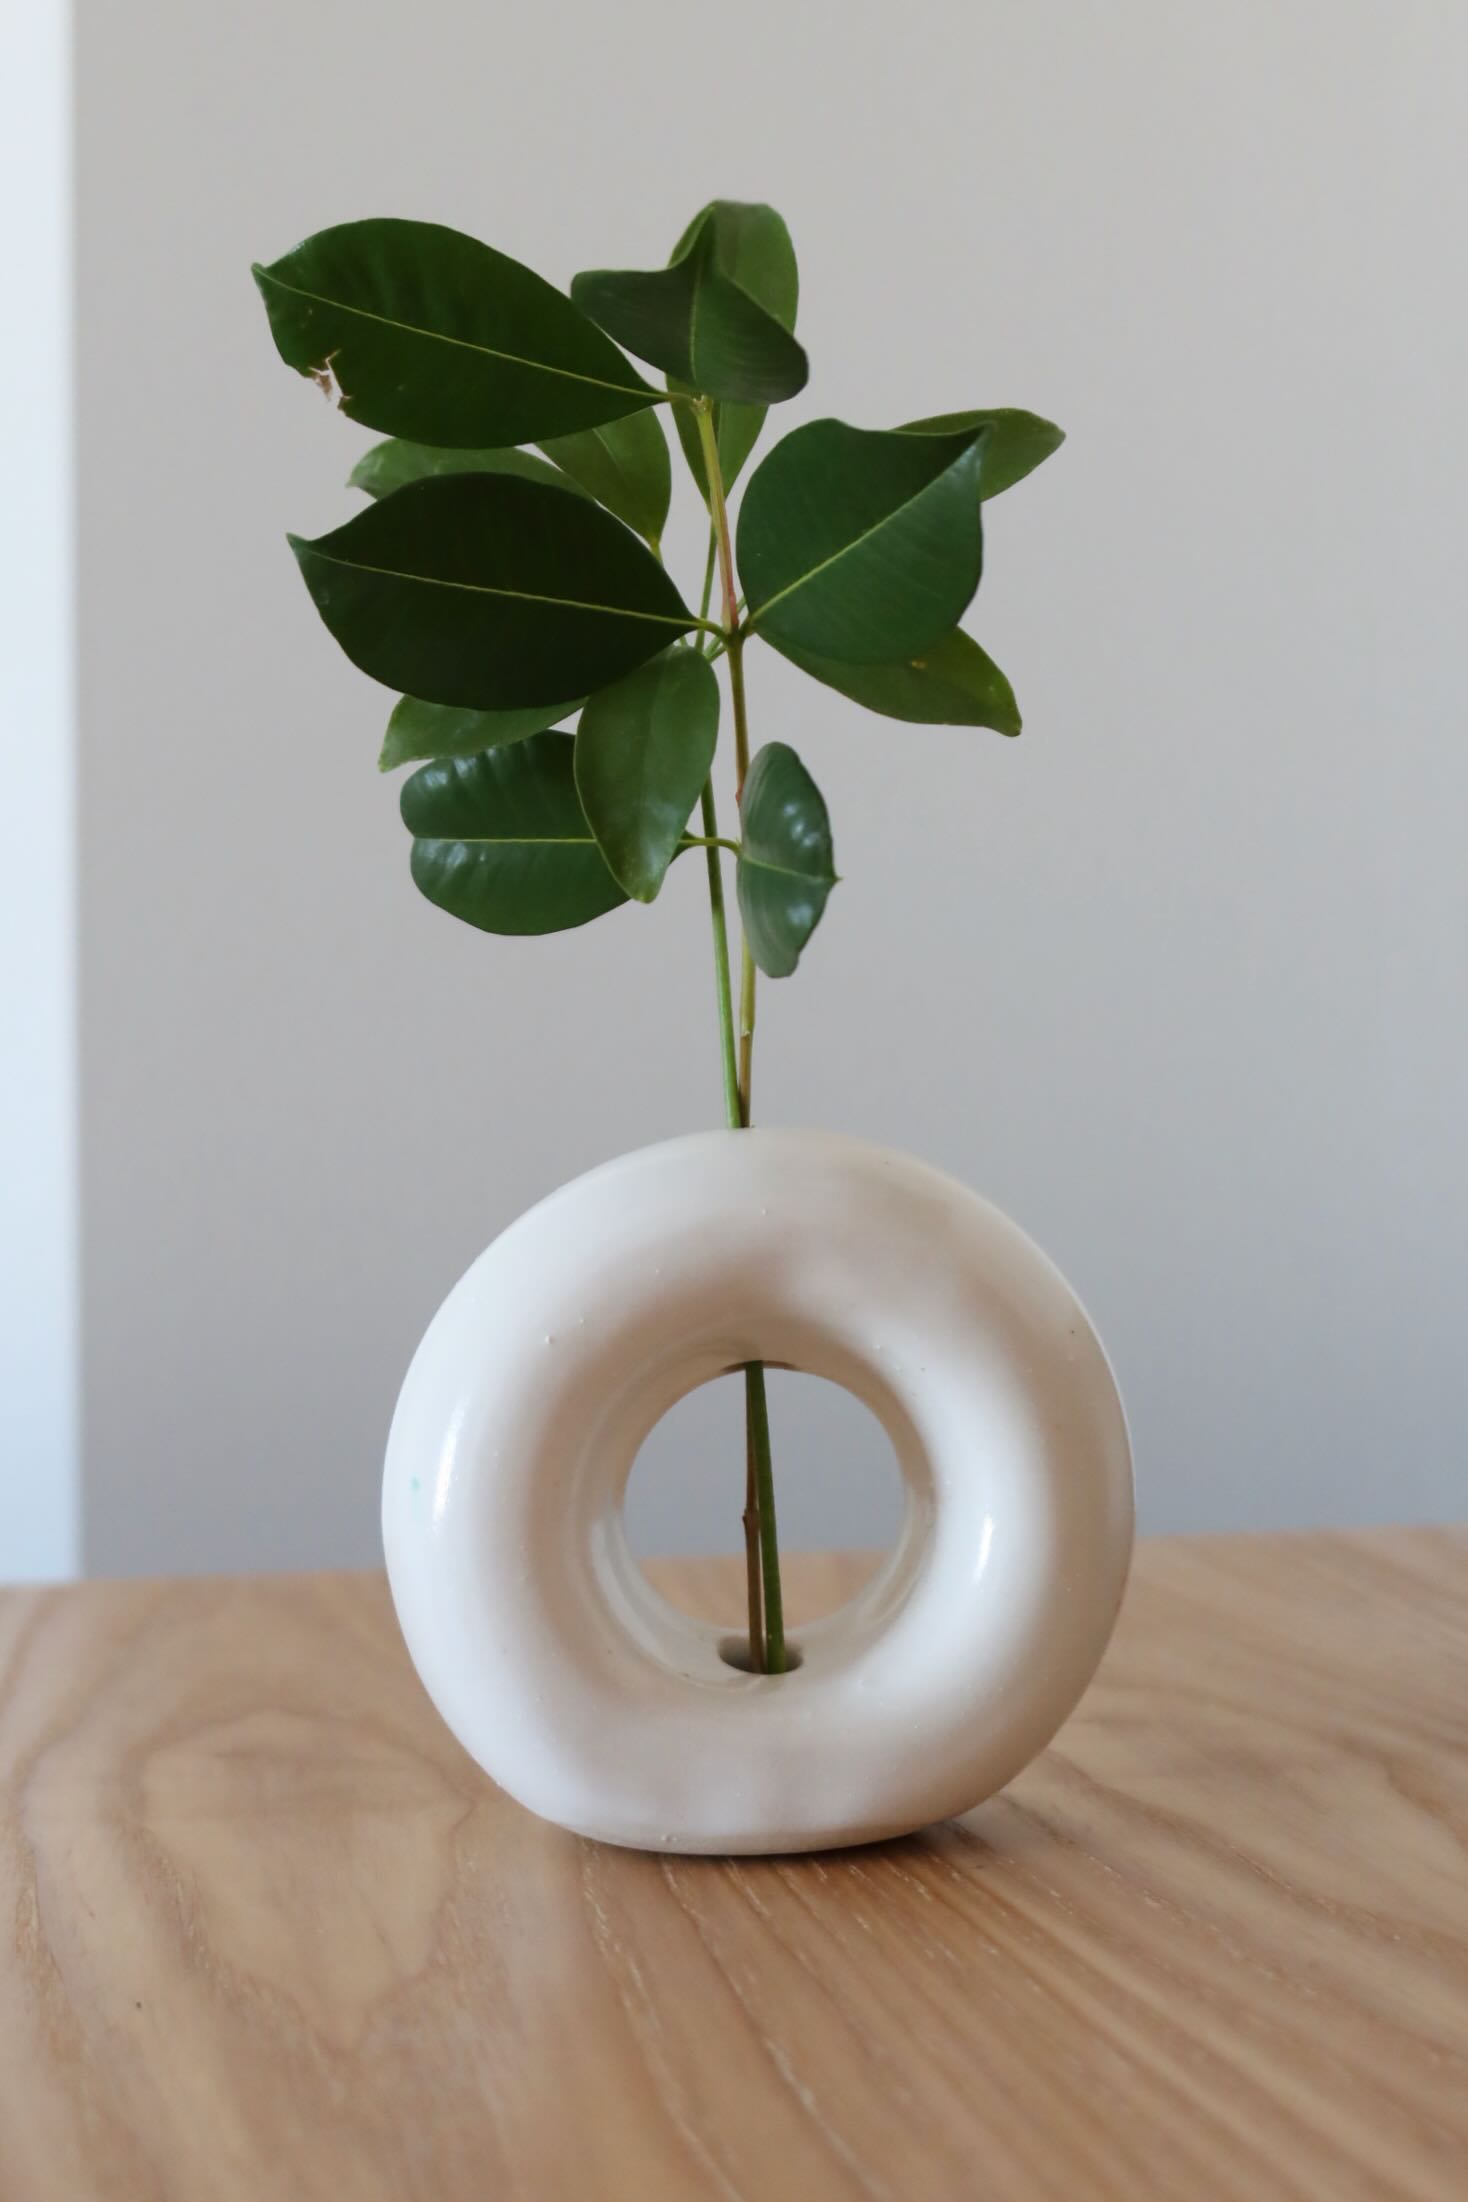 assets/ceramics1.jpeg|Photo of a ceramic vase shaped like a donut with a stem in it"